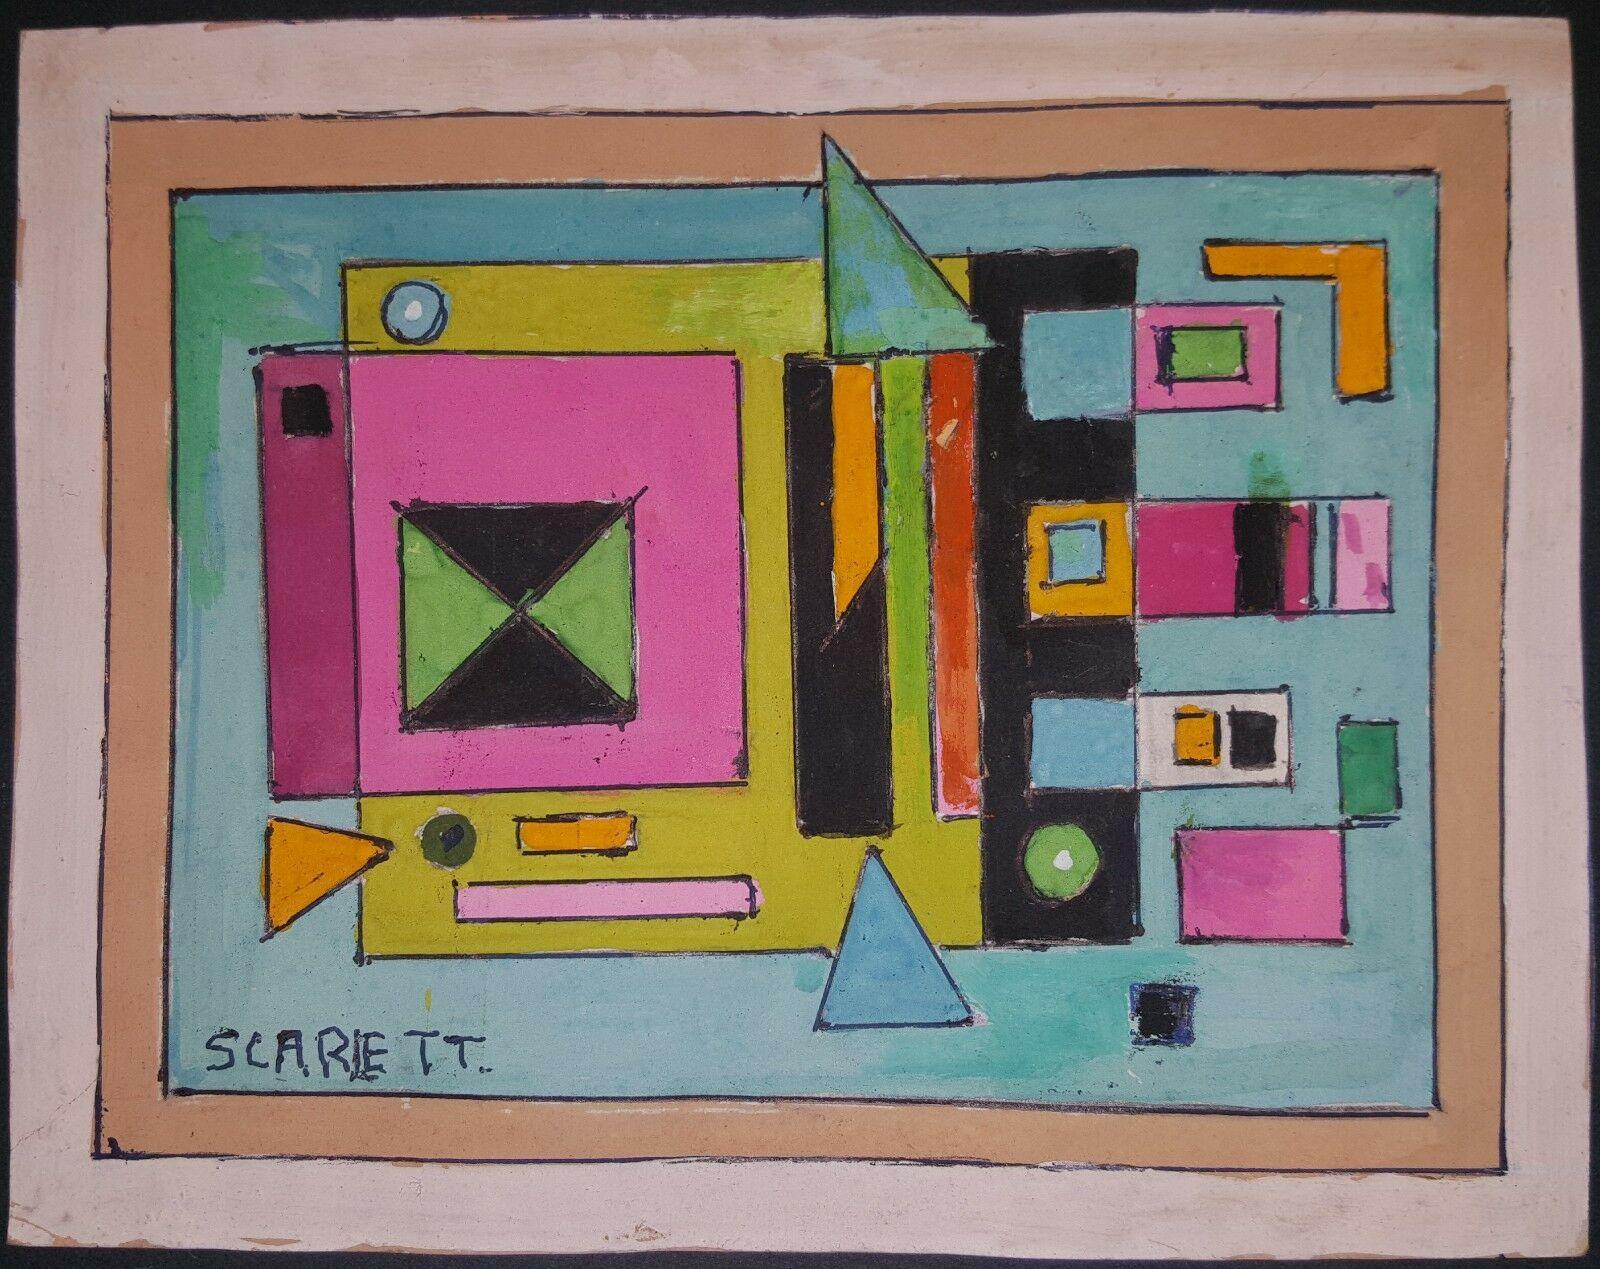 Rolph Scarlett, Modernist Abstract Composition, Guache on Paper, Ca. 1950's  - Simpson Advanced Chiropractic & Medical Center